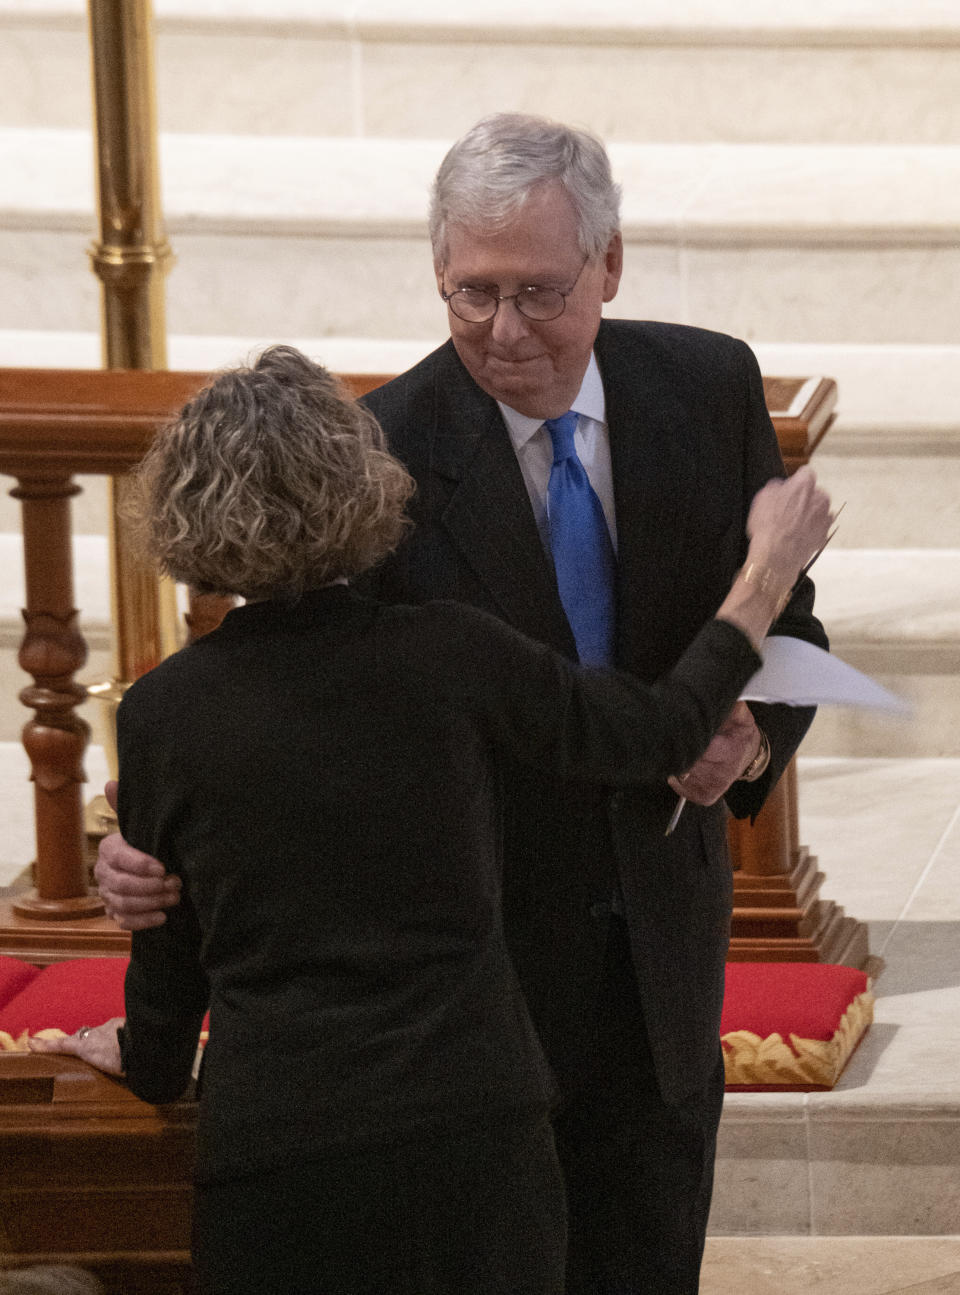 U.S. Sen. Mitch McConnell, R-Ky., embraces Diane Davison, wife of former Sen. Johnny Isakson's wife, during a funeral service for Isakson at Peachtree Road United Methodist Church, Thursday afternoon, Jan. 6, 2022, in Atlanta. Isakson, 76, died Dec. 19, 2021, at his home in Atlanta. (Ben Gray/Atlanta Journal-Constitution via AP)